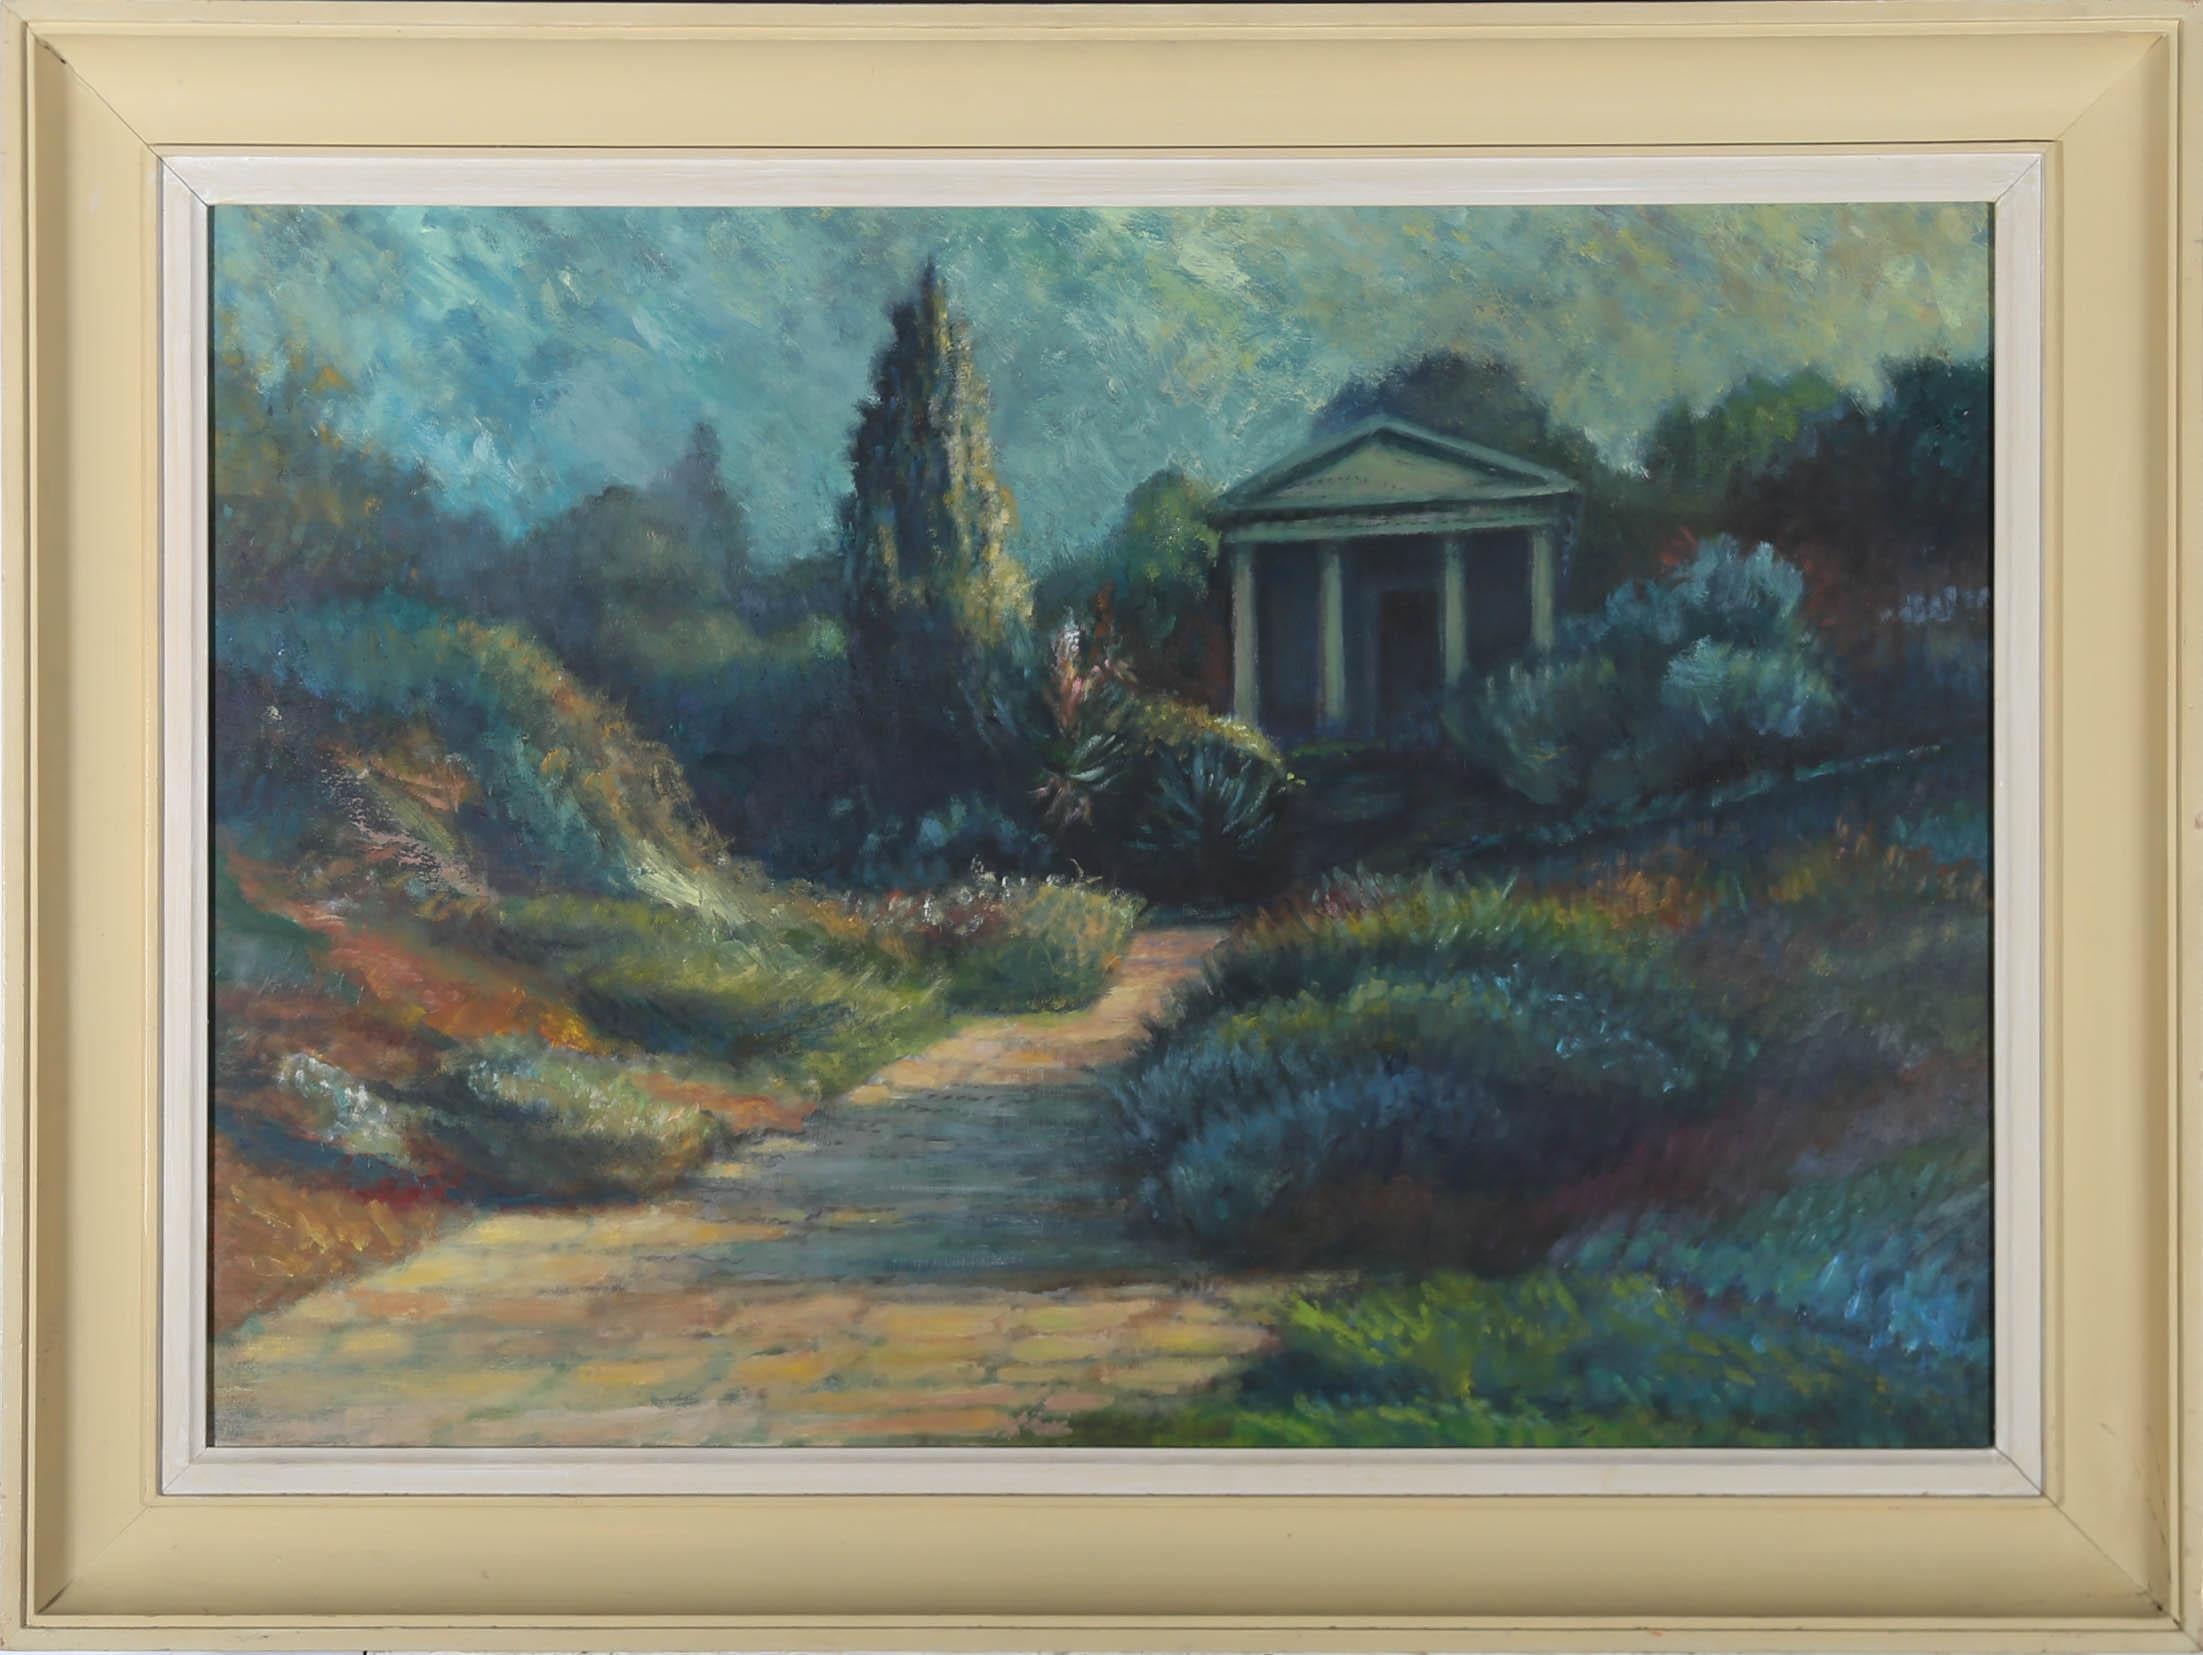 An atmospheric study of aromatic planting at Kew, with King William's Temple in the background. Painted by contemporary artist Dorothy Southern. This particular oil was exhibited at the RBA annual exhibition in 2011. Well-presented in a pale olive